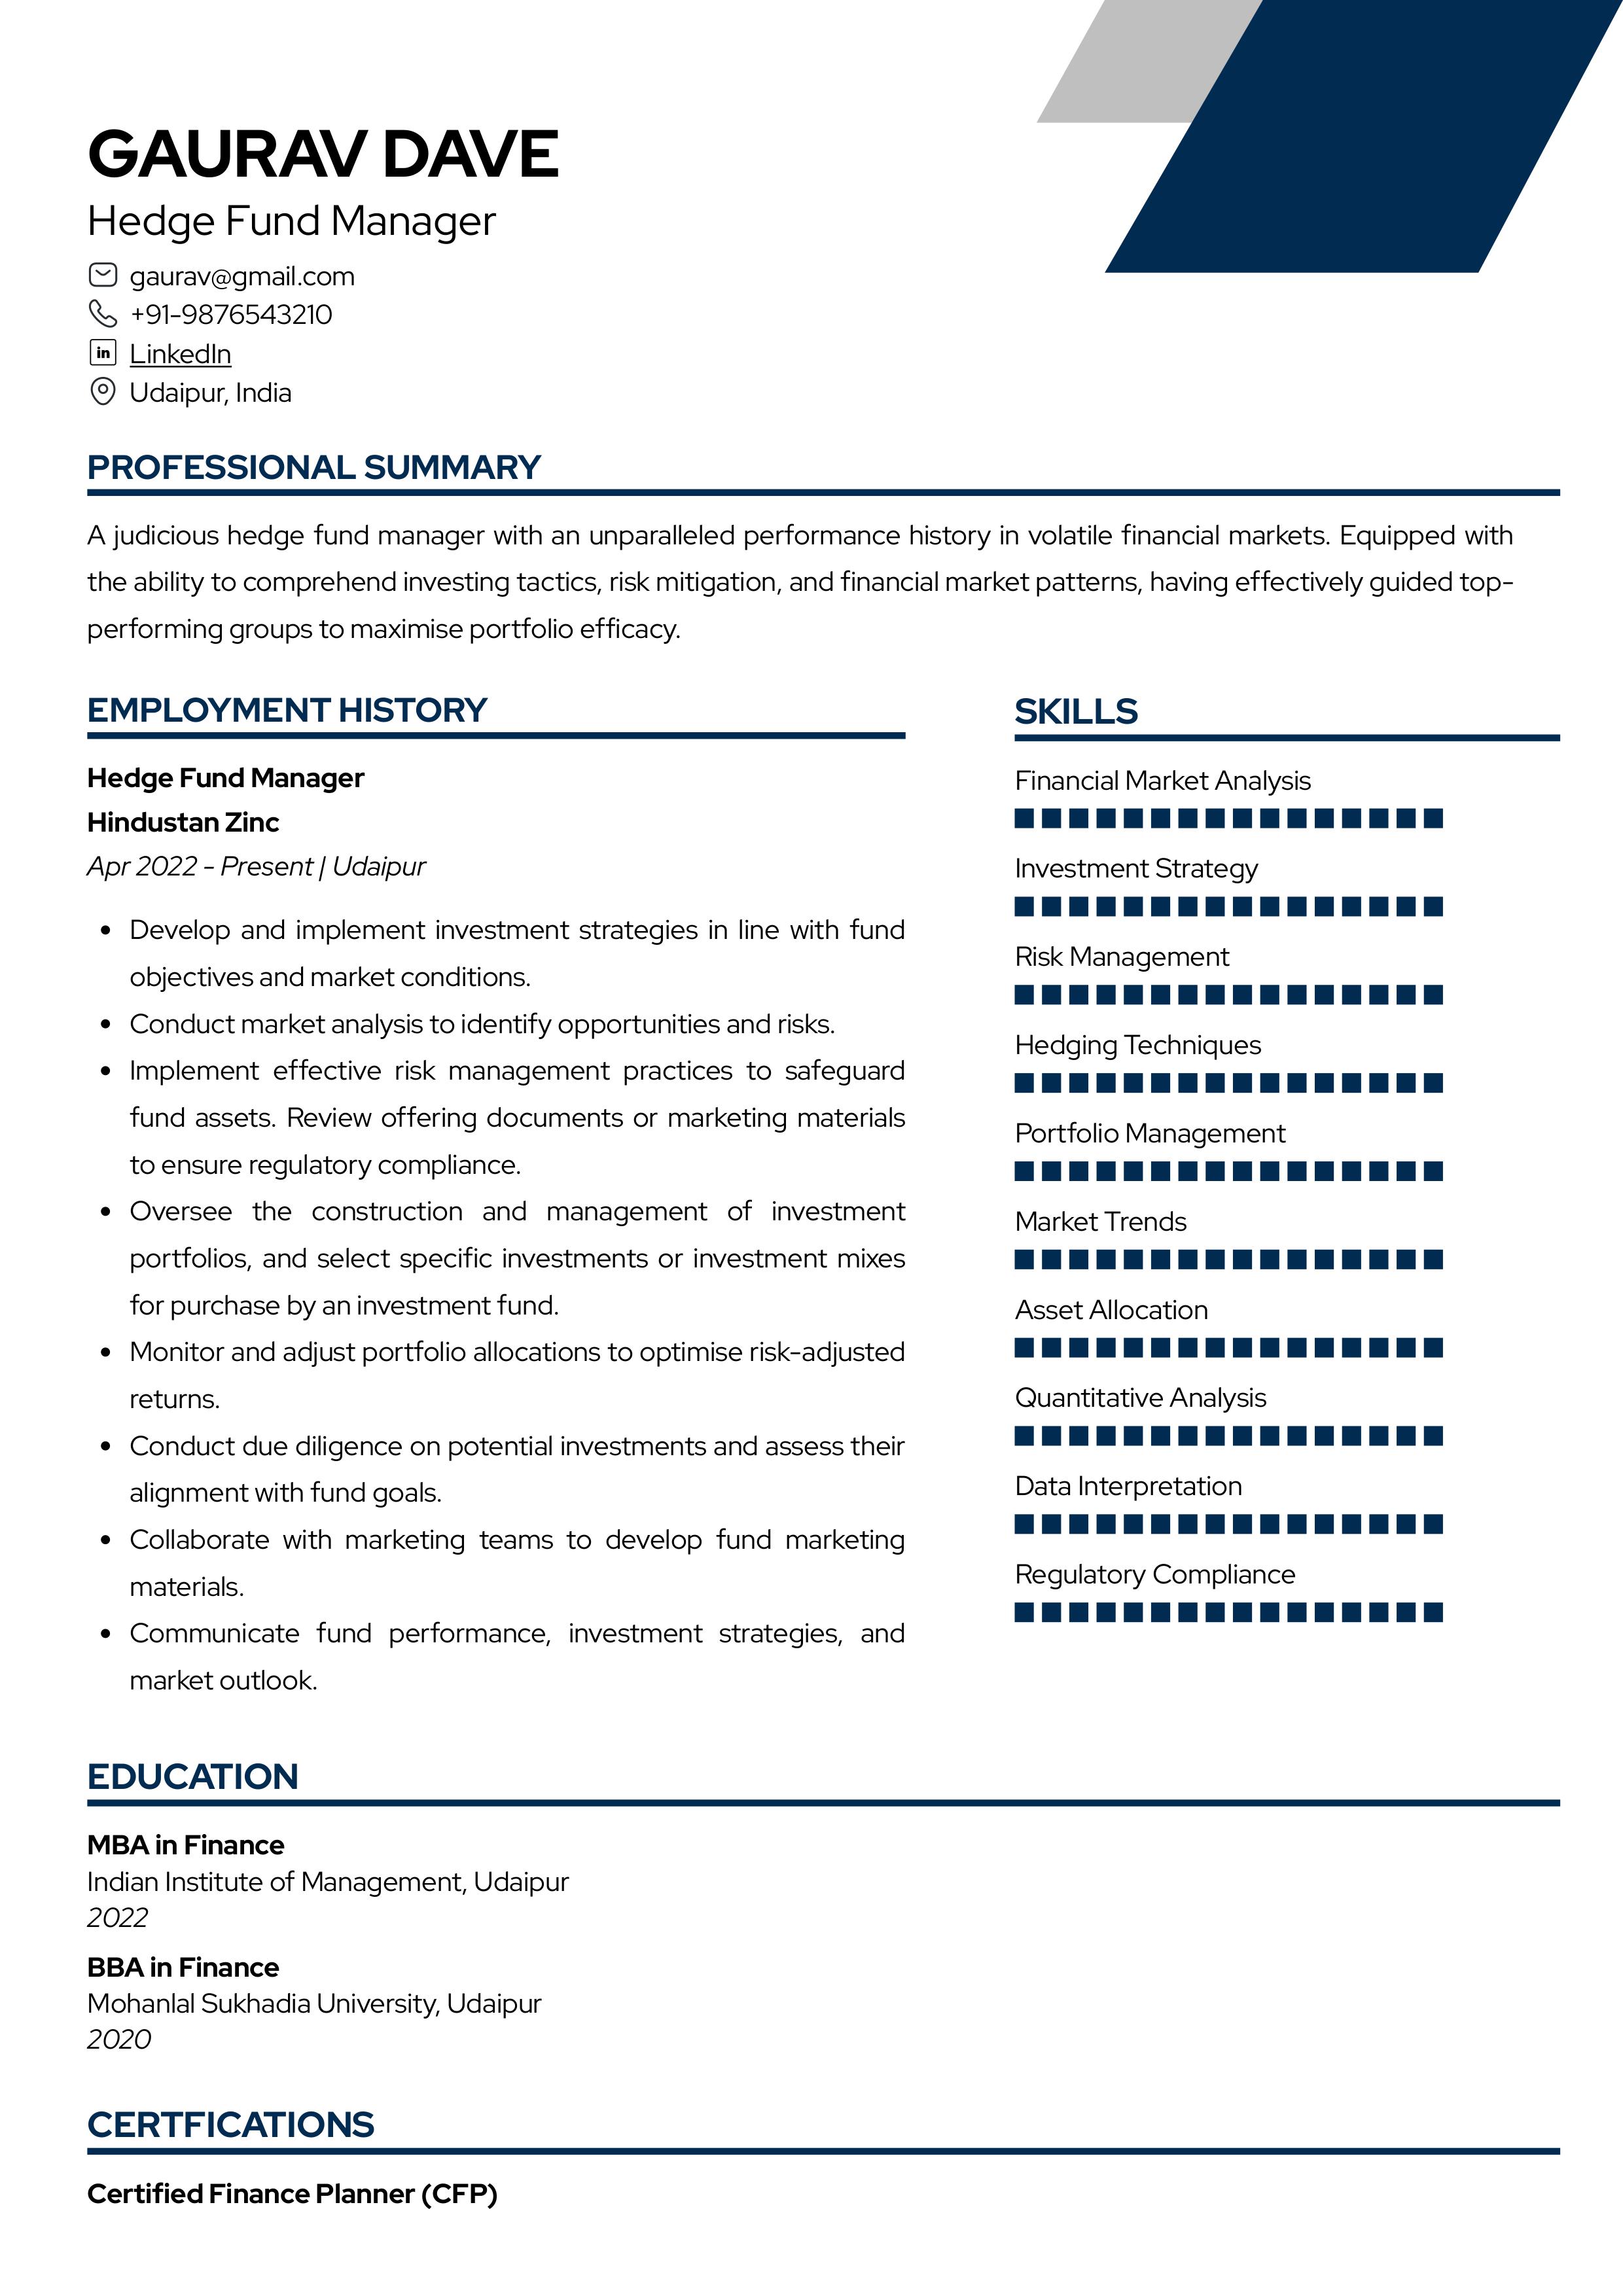 Sample Resume of  Hedge Fund Manager | Free Resume Templates & Samples on Resumod.co